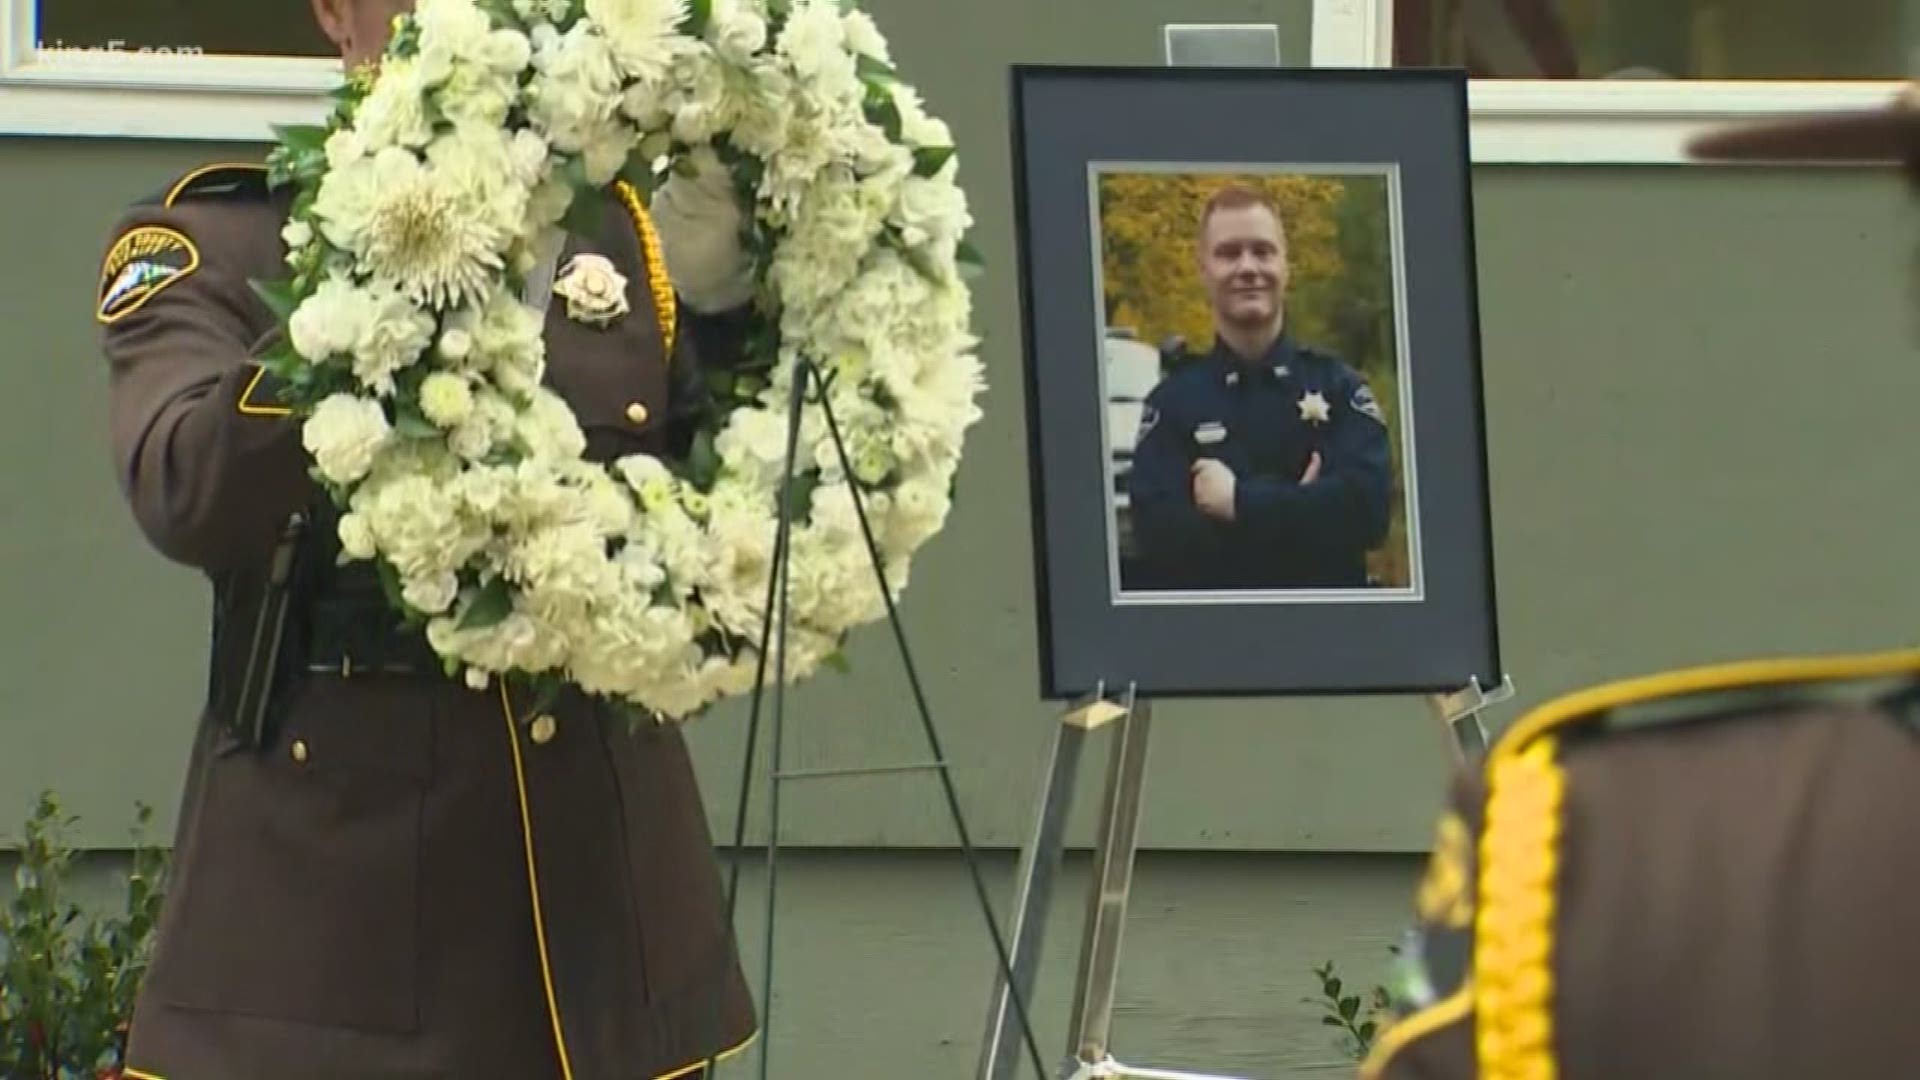 It's been a year since Pierce County Deputy Daniel McCartney died whild responding to a home invasion in Spanaway. He left behind his wife and three little boys.